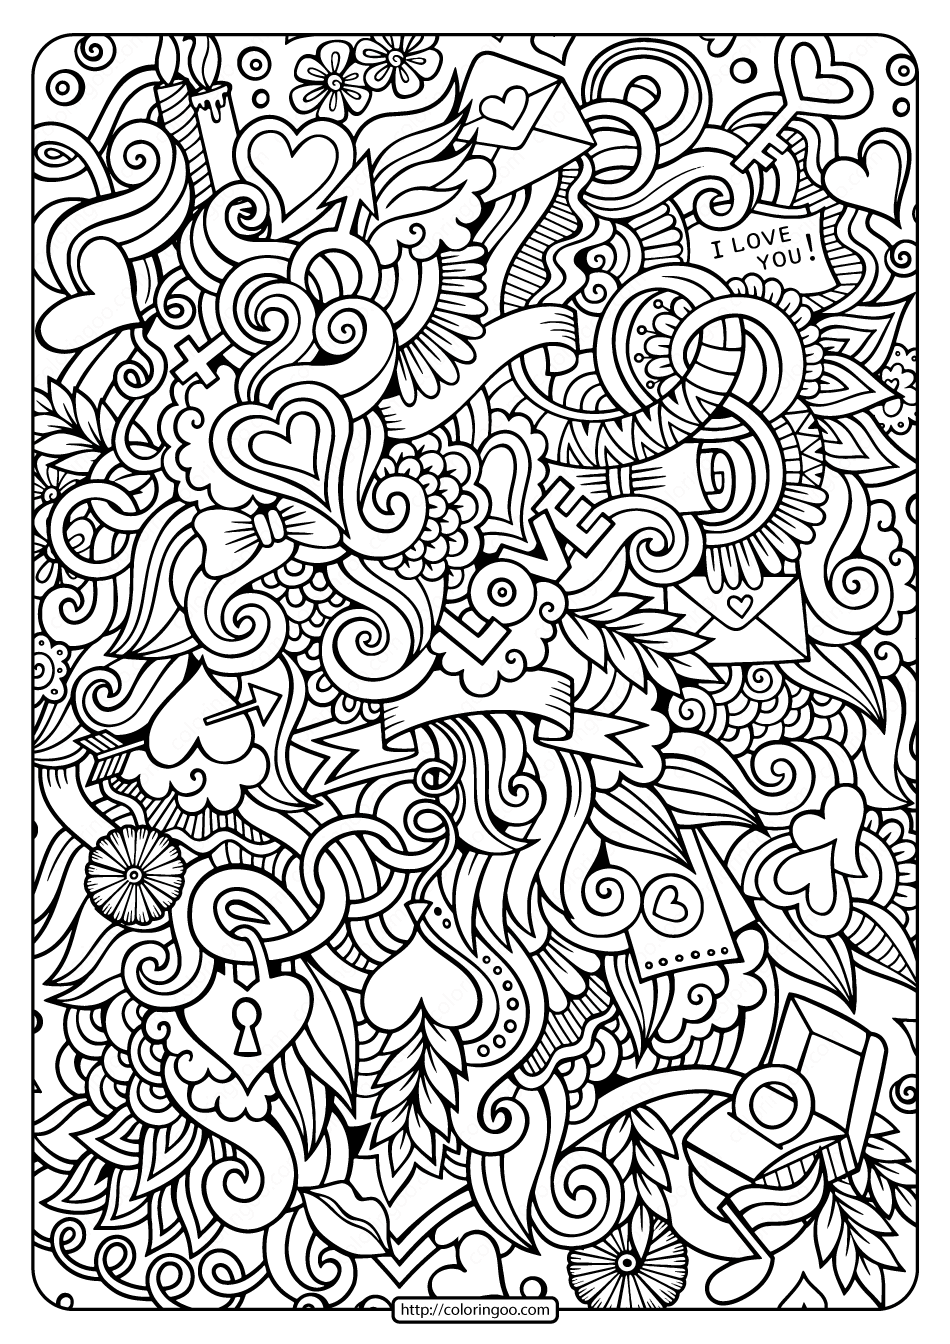 free printable love doodle coloring pages